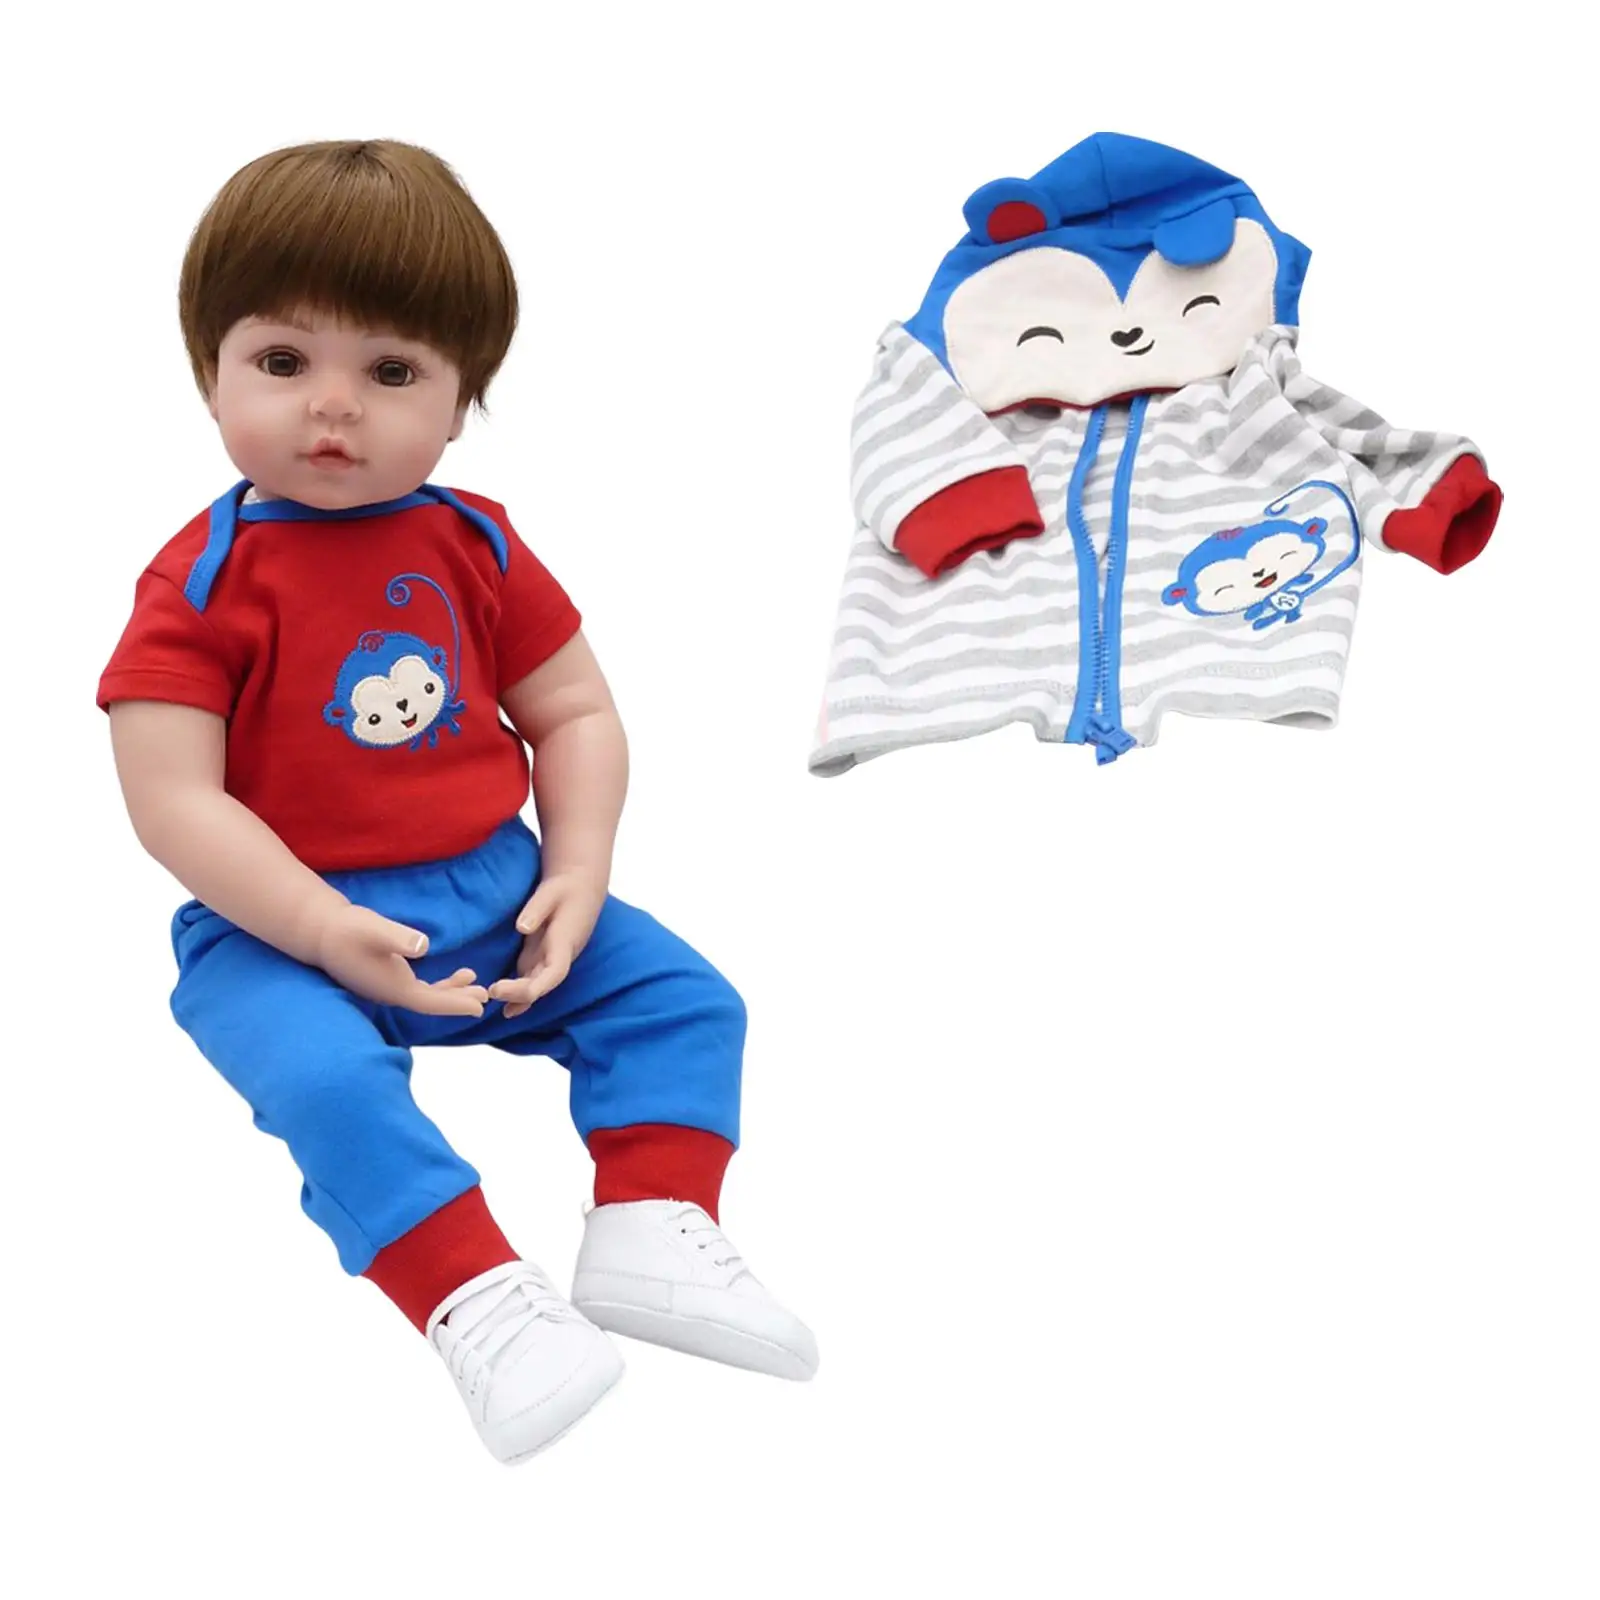 Baby Doll with Clothes Cute Newborn Doll Toddlers Toy Silicone Body for Preschool Children Gifts Role Playing Kids Companion